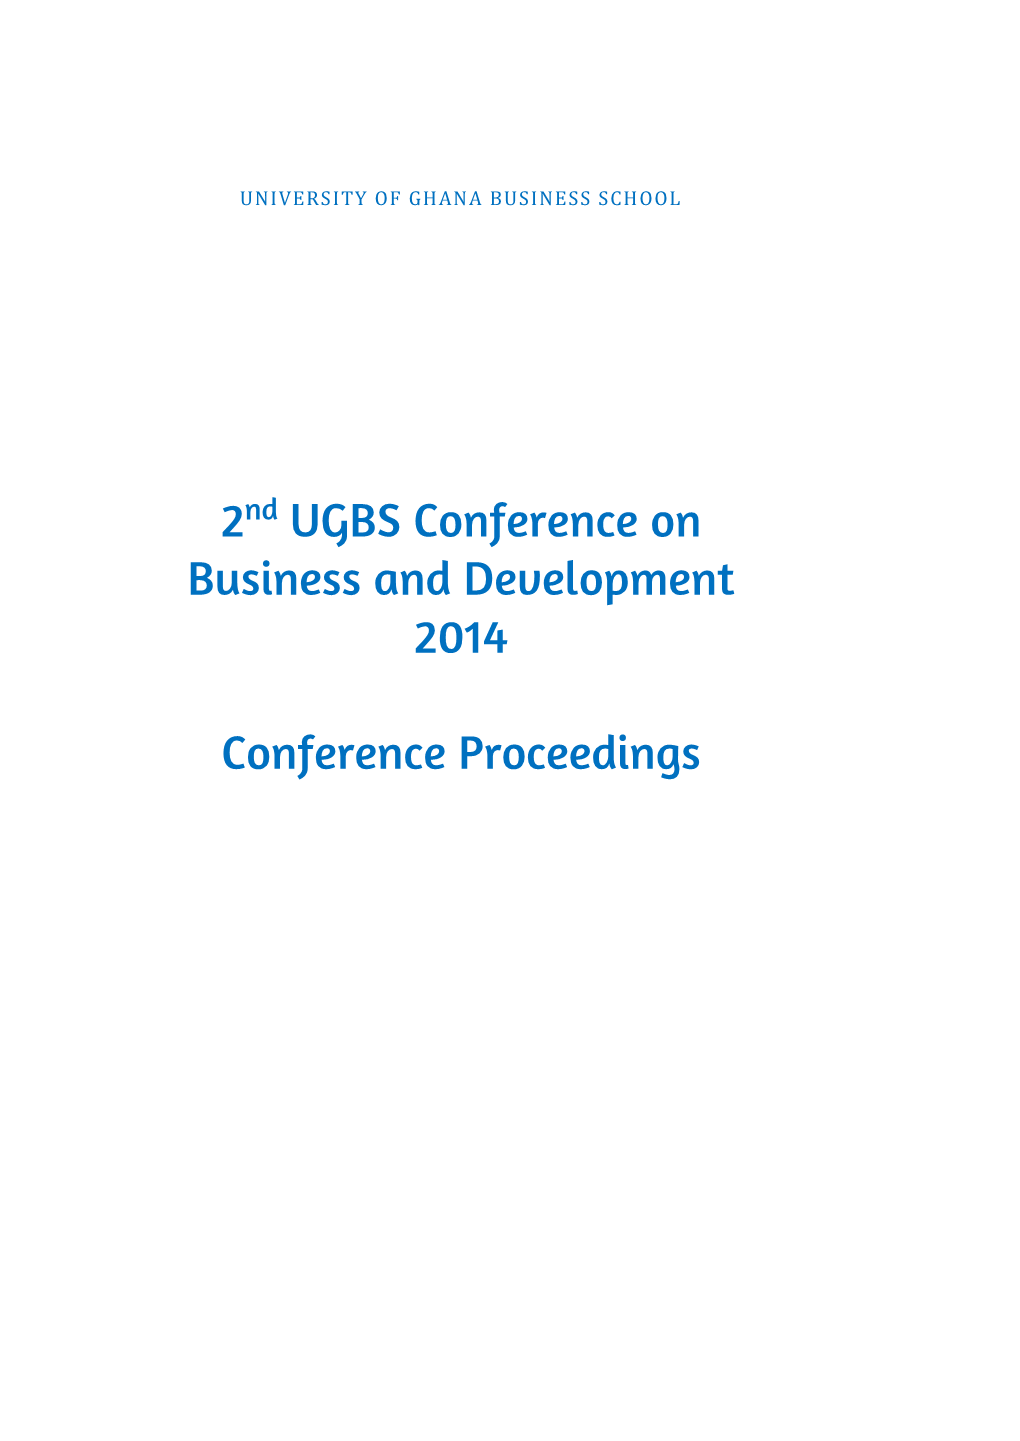 2Nd UGBS Conference on Business and Development 2014